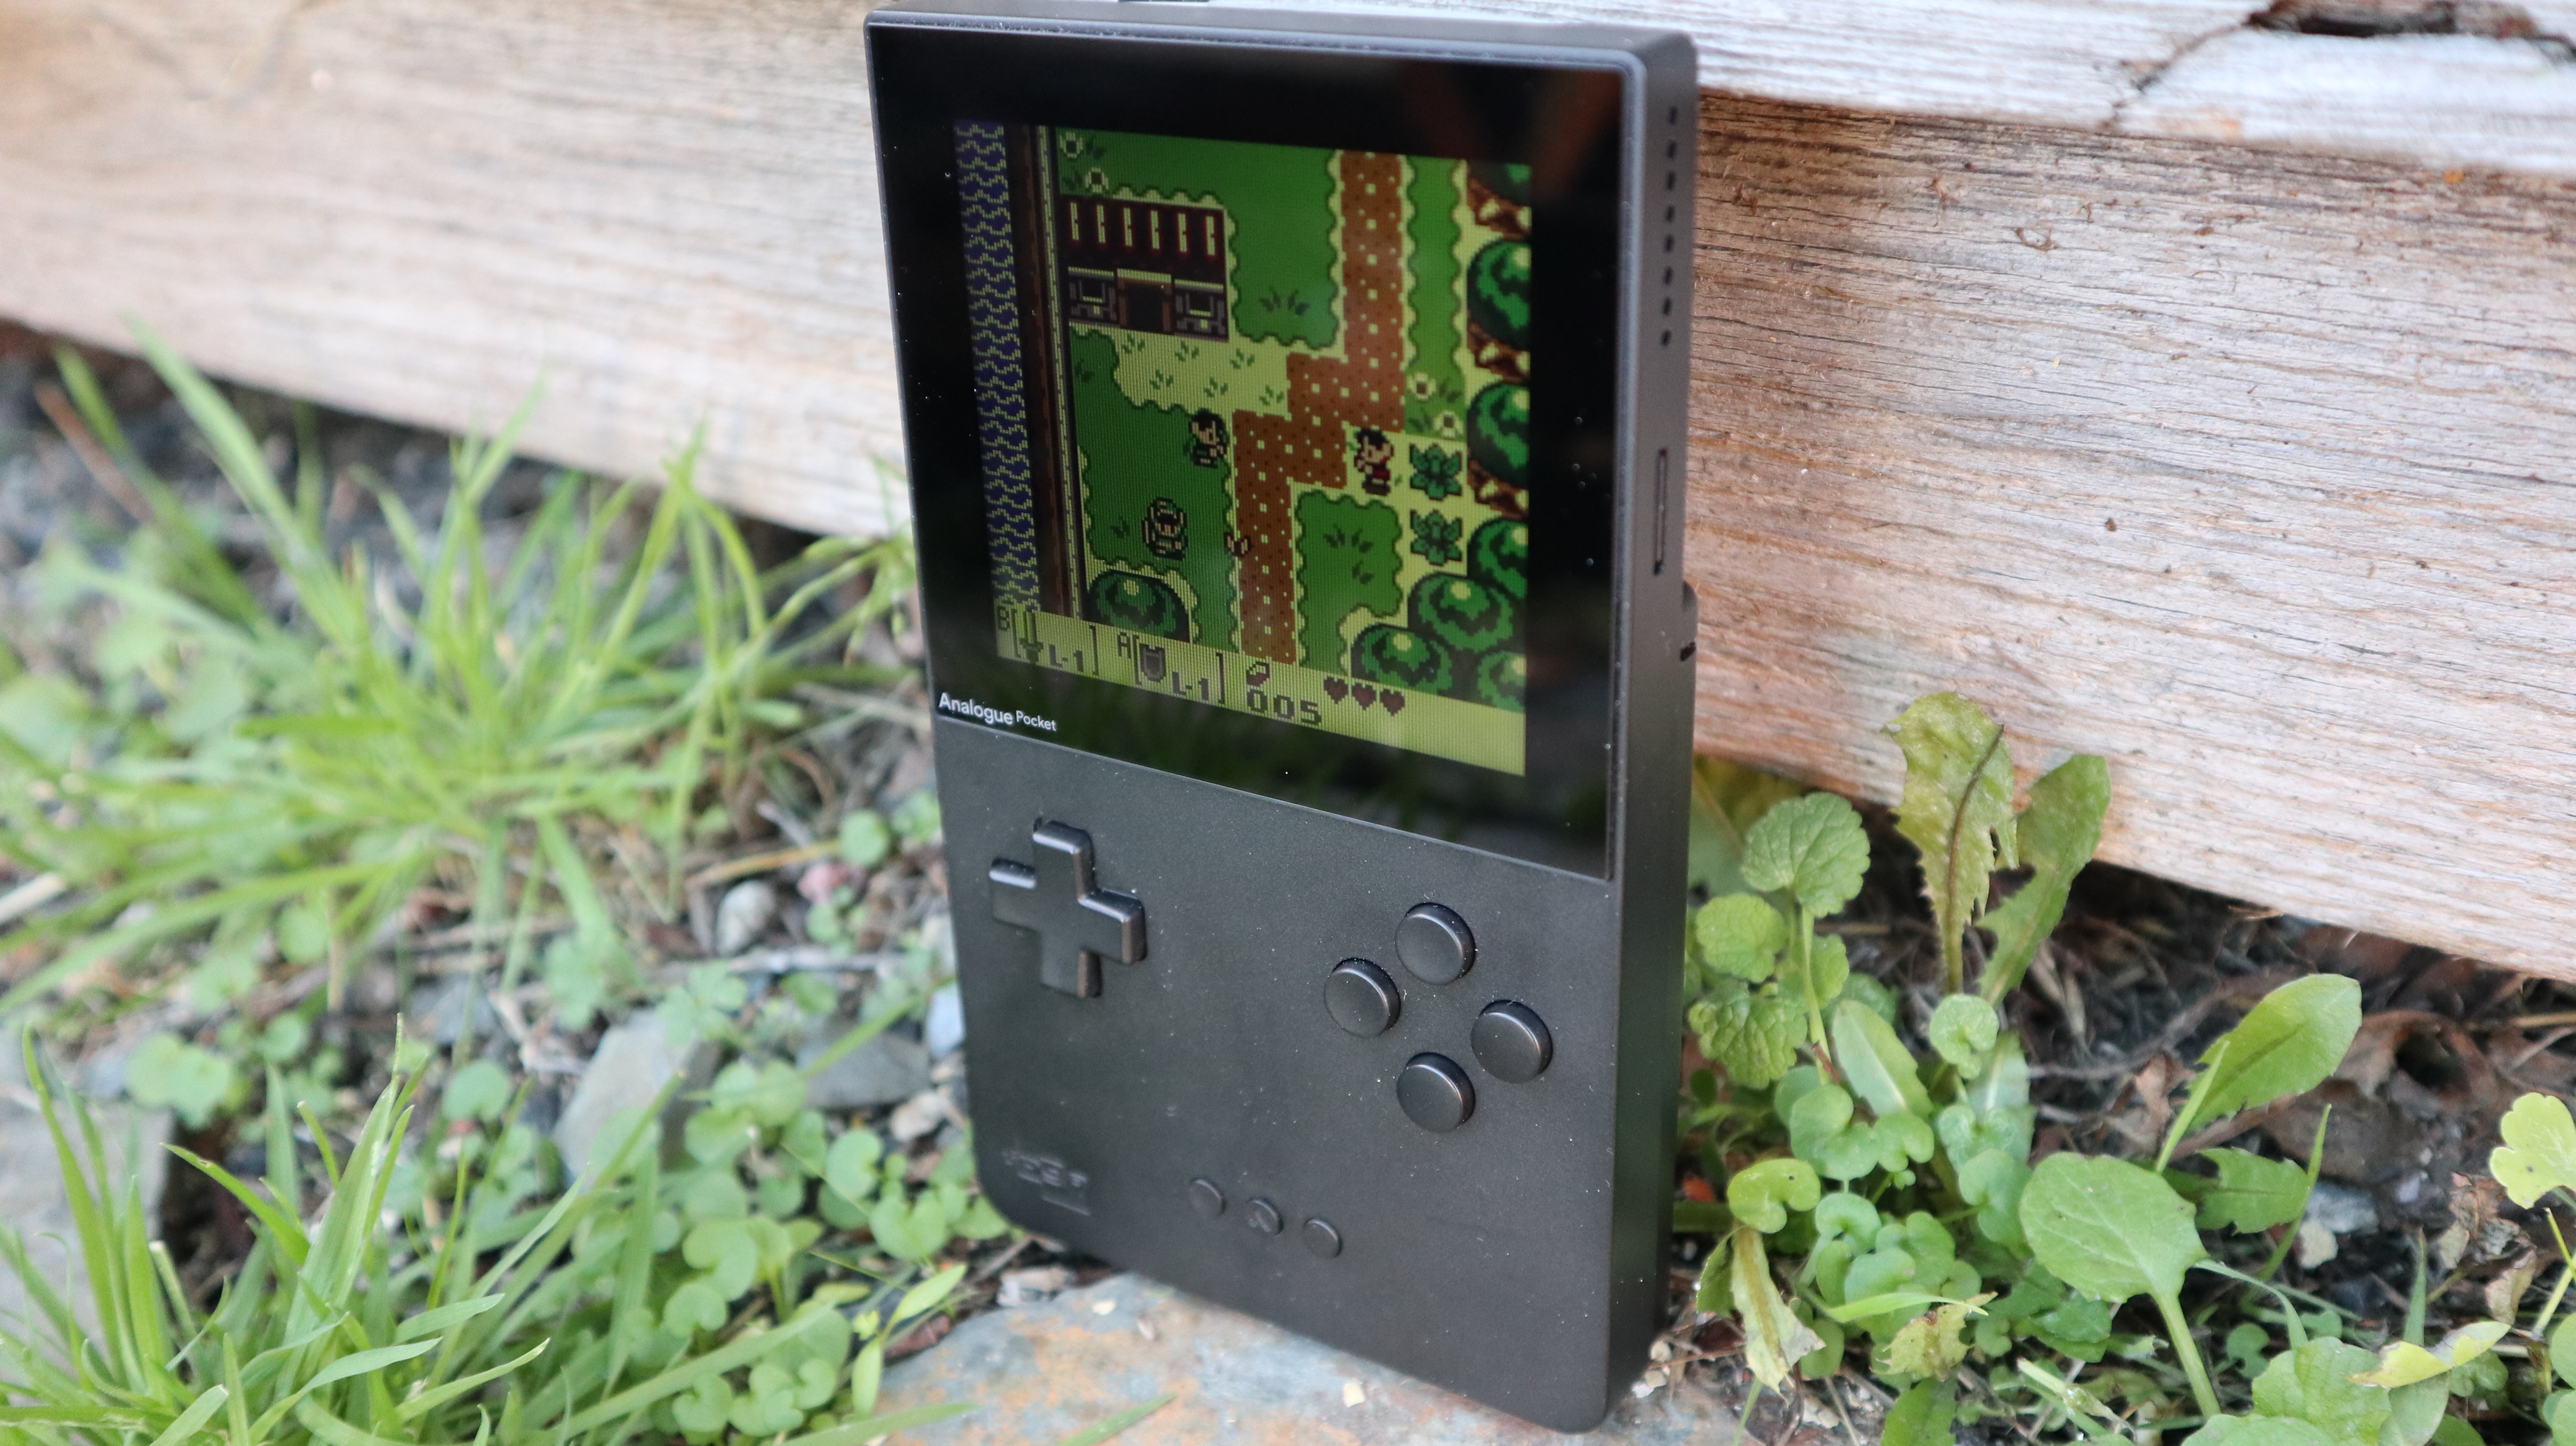 Analogue Pocket review: The greatest Game Boy ever made | Ars Technica